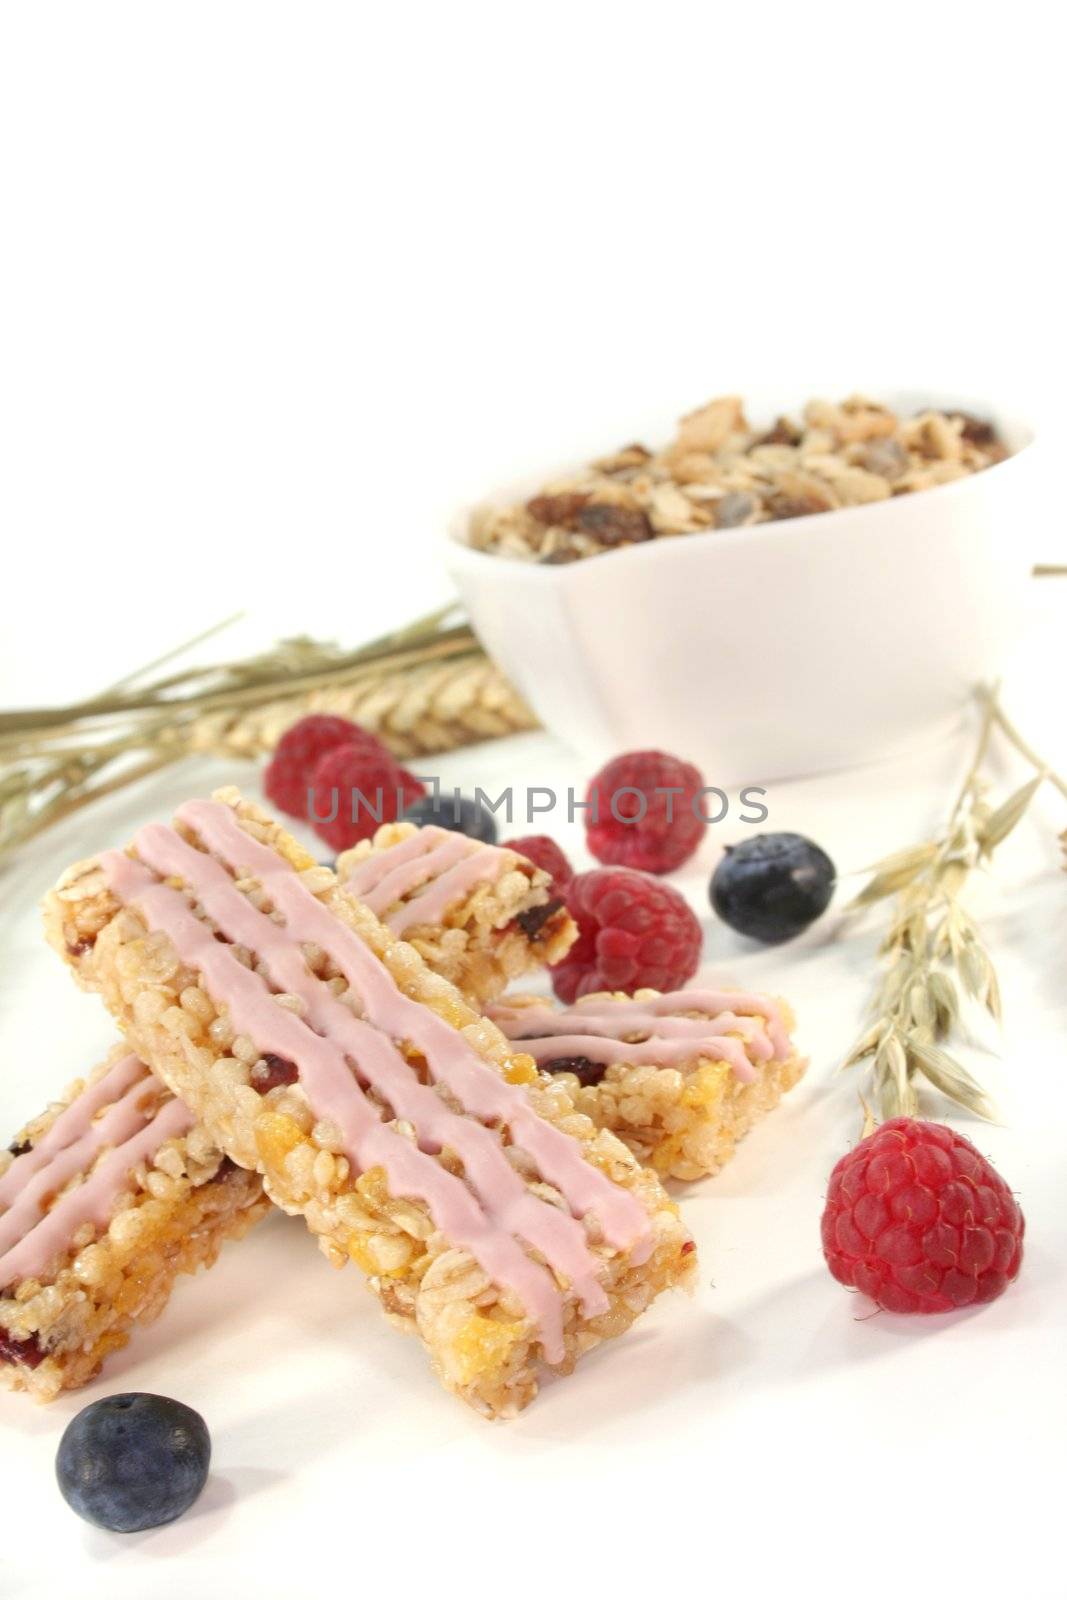 Forest berry cereal bar with blueberries and raspberries